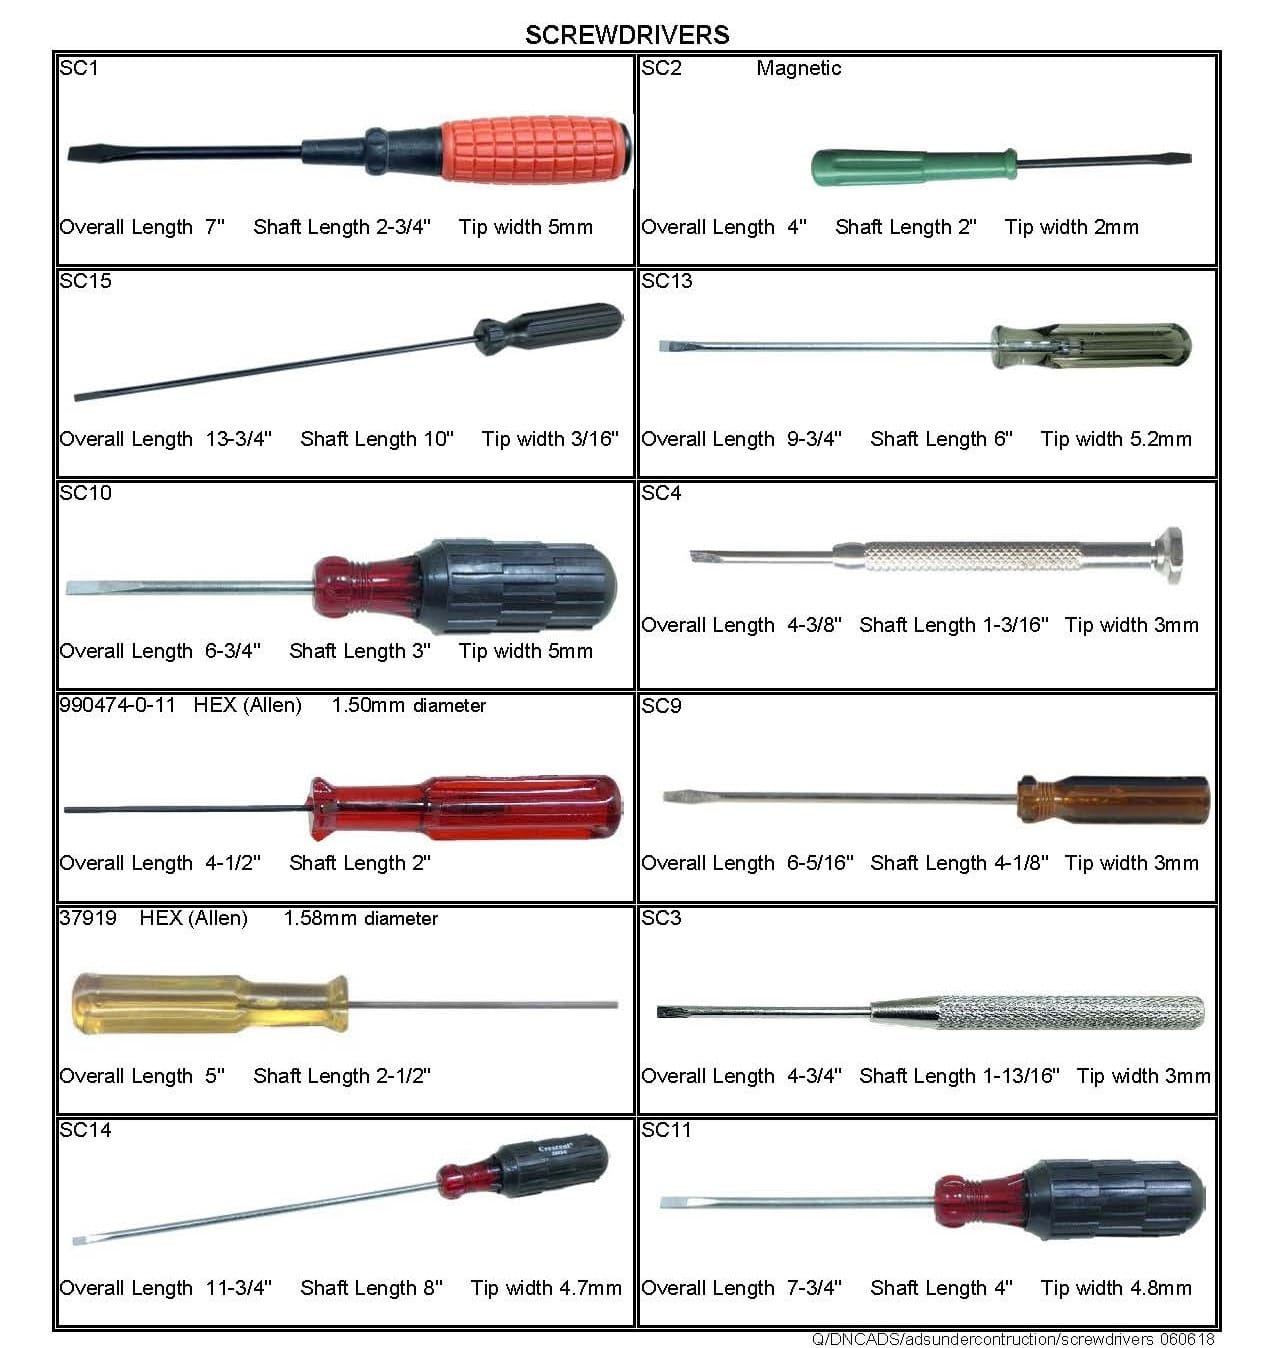 SCREWDRIVERS for
INDUSTRIAL SEWING MACHINES